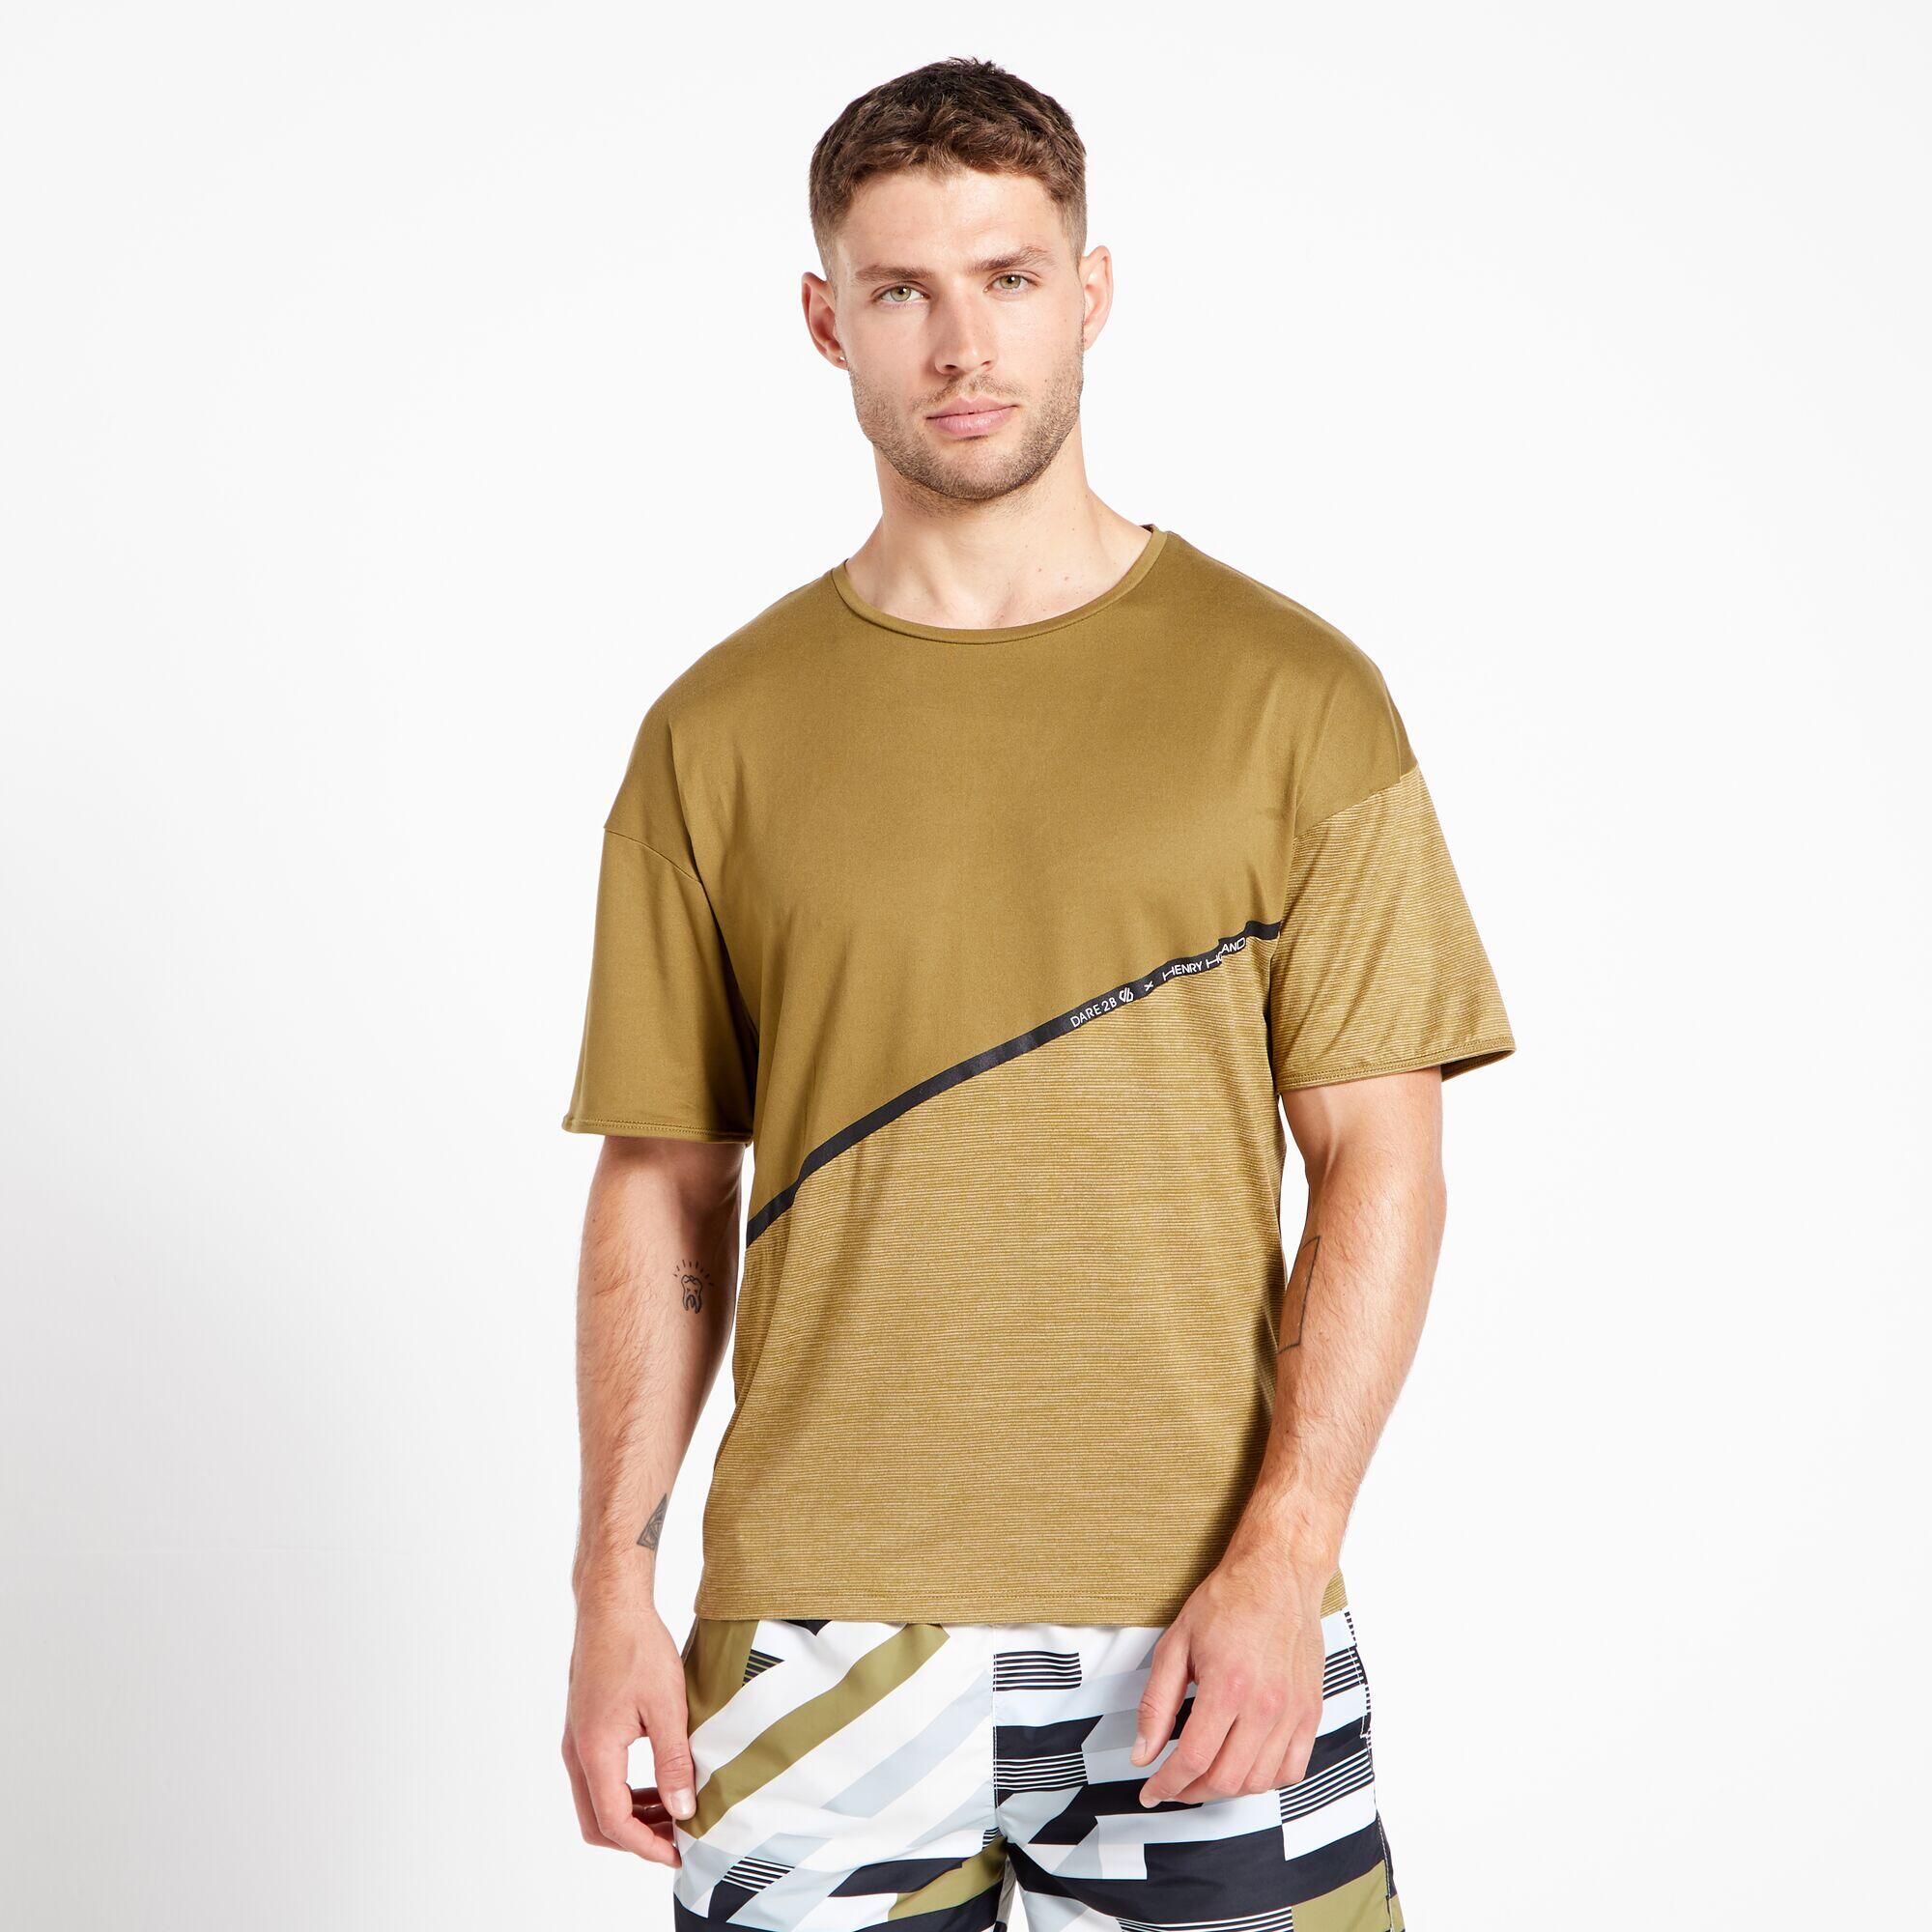 Henry Holland No Sweat Mens Gym Active T-Shirt - Olive Green 1/4